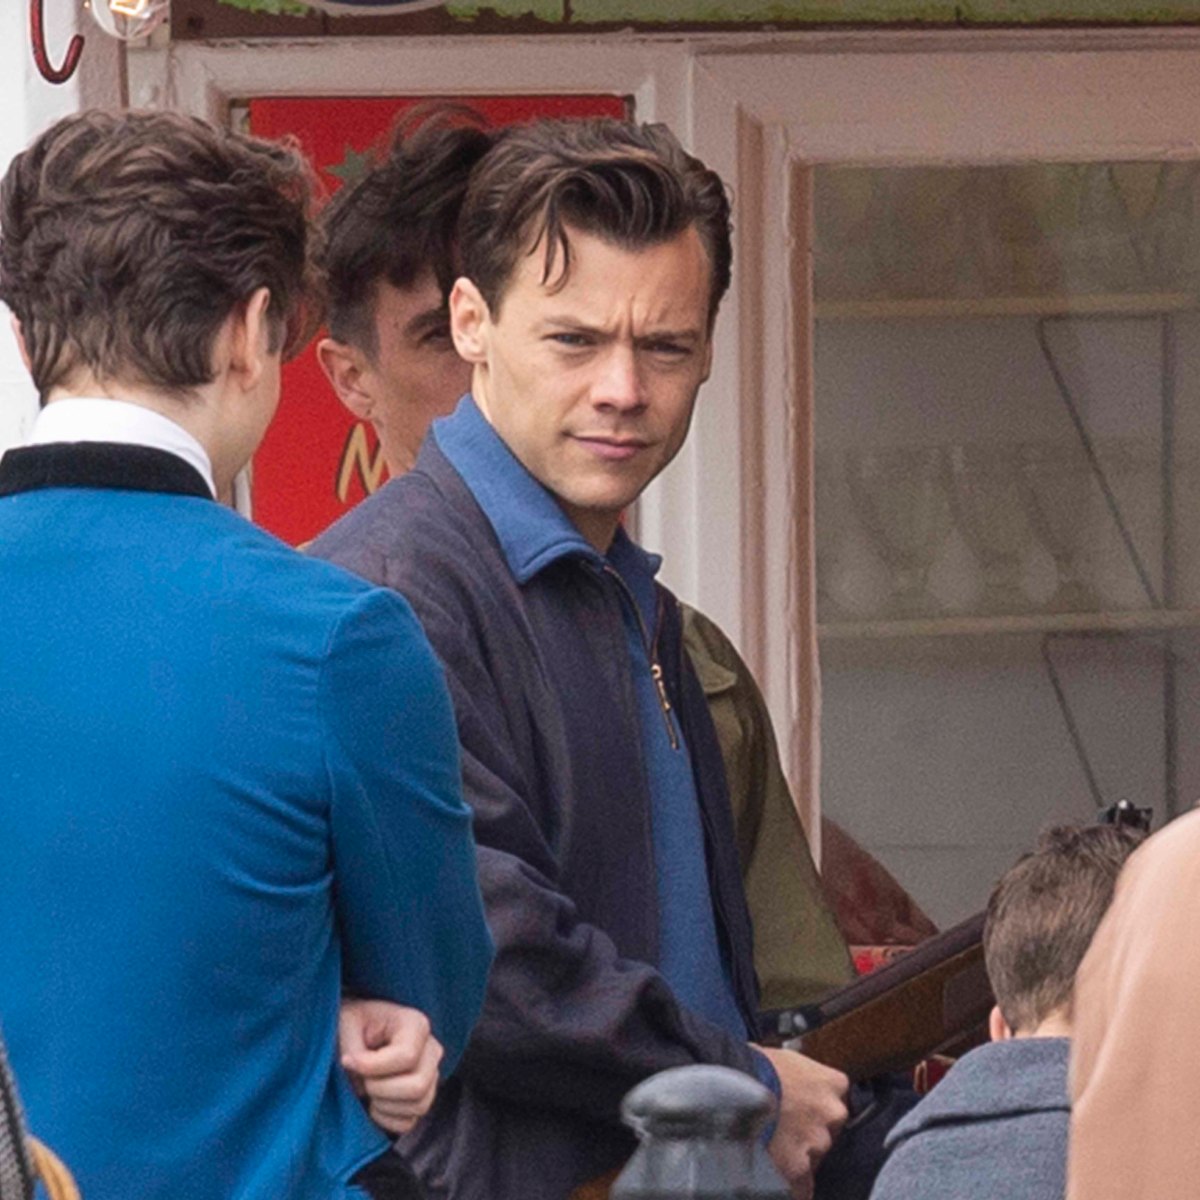 Harry Styles Films 'My Policeman': Every Photo of Him on Set